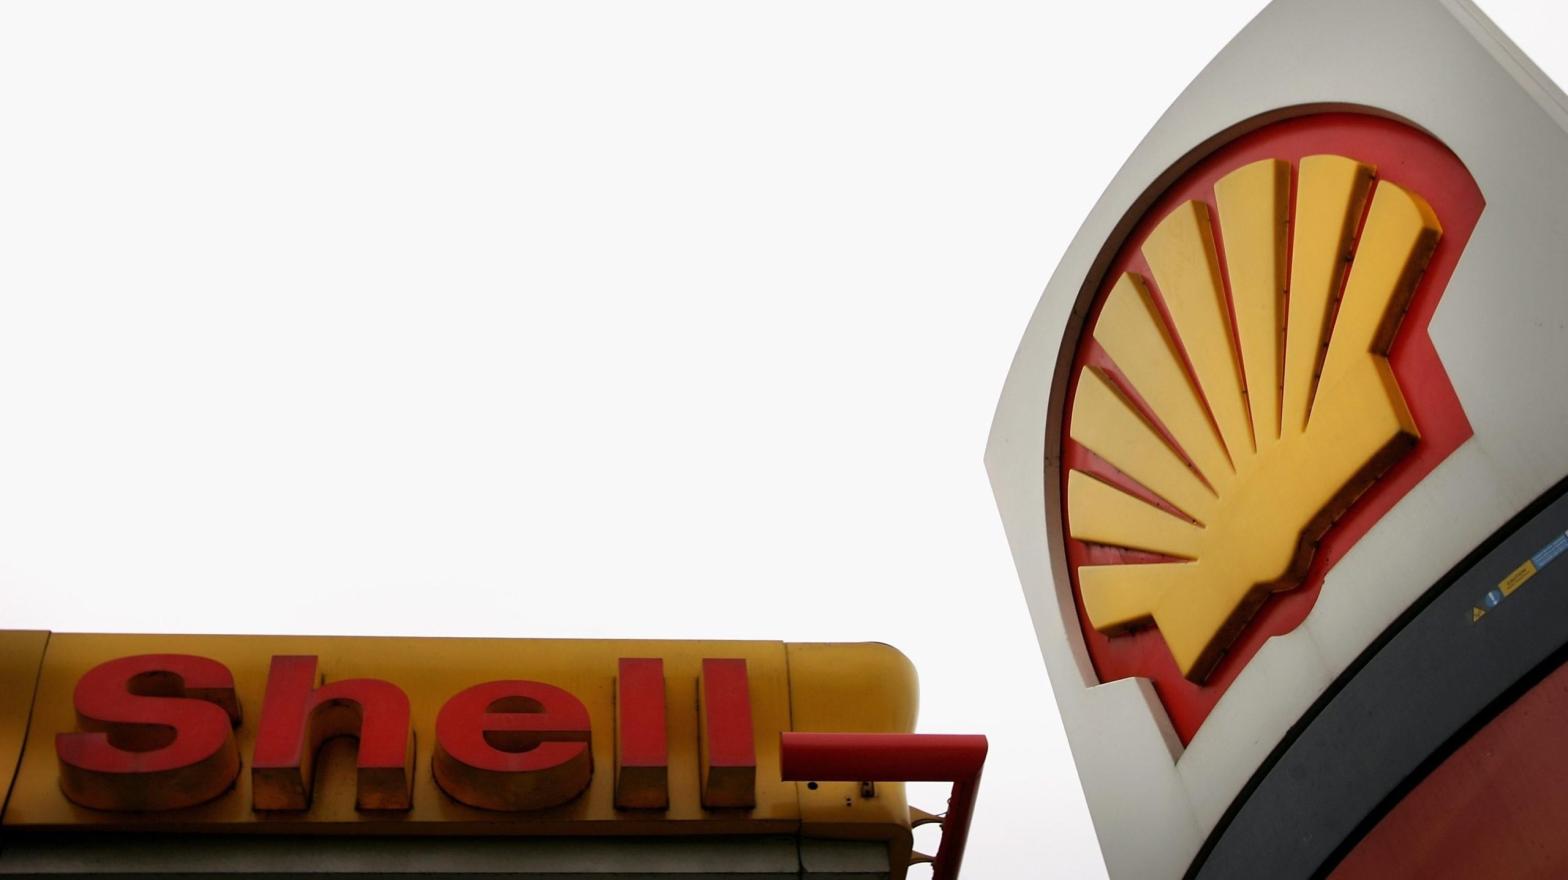 All my homies hate Shell. (Photo: Bruno Vincent, Getty Images)